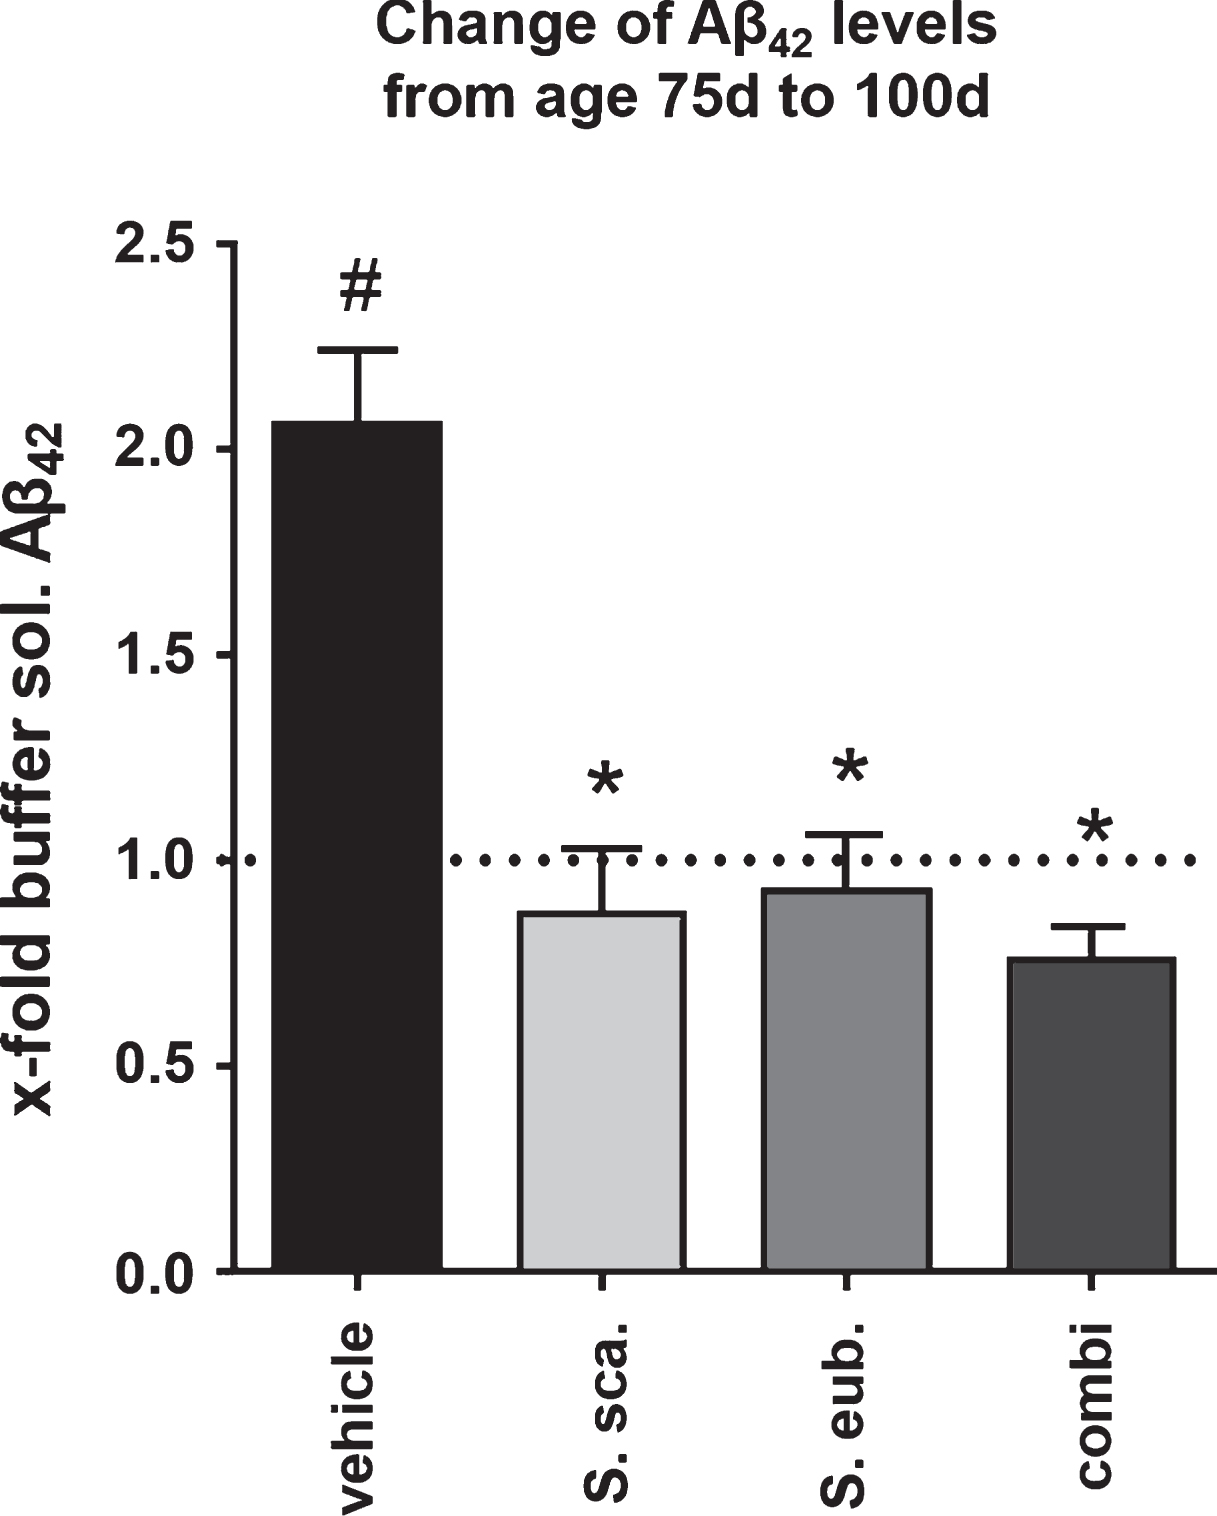 Sideritis spp. treatment stabilizes Aβ42 levels. Calculation of the fold-increase of buffer-soluble Aβ42 levels reveals that post-AD-onset treatment with Sideritis spp. extracts cuts the increase from the age of 50 d (treatment start) to 100 d by at least half and thus stabilizes the amount of Aβ42 at the level of 75-days-old animals (represented by the dotted line). *indicates significant difference to vehicle; #indicates significant difference to 75-days-old, untreated mice (i.e., dotted line at 1.0) (mean + SEM, *p < 0.05).